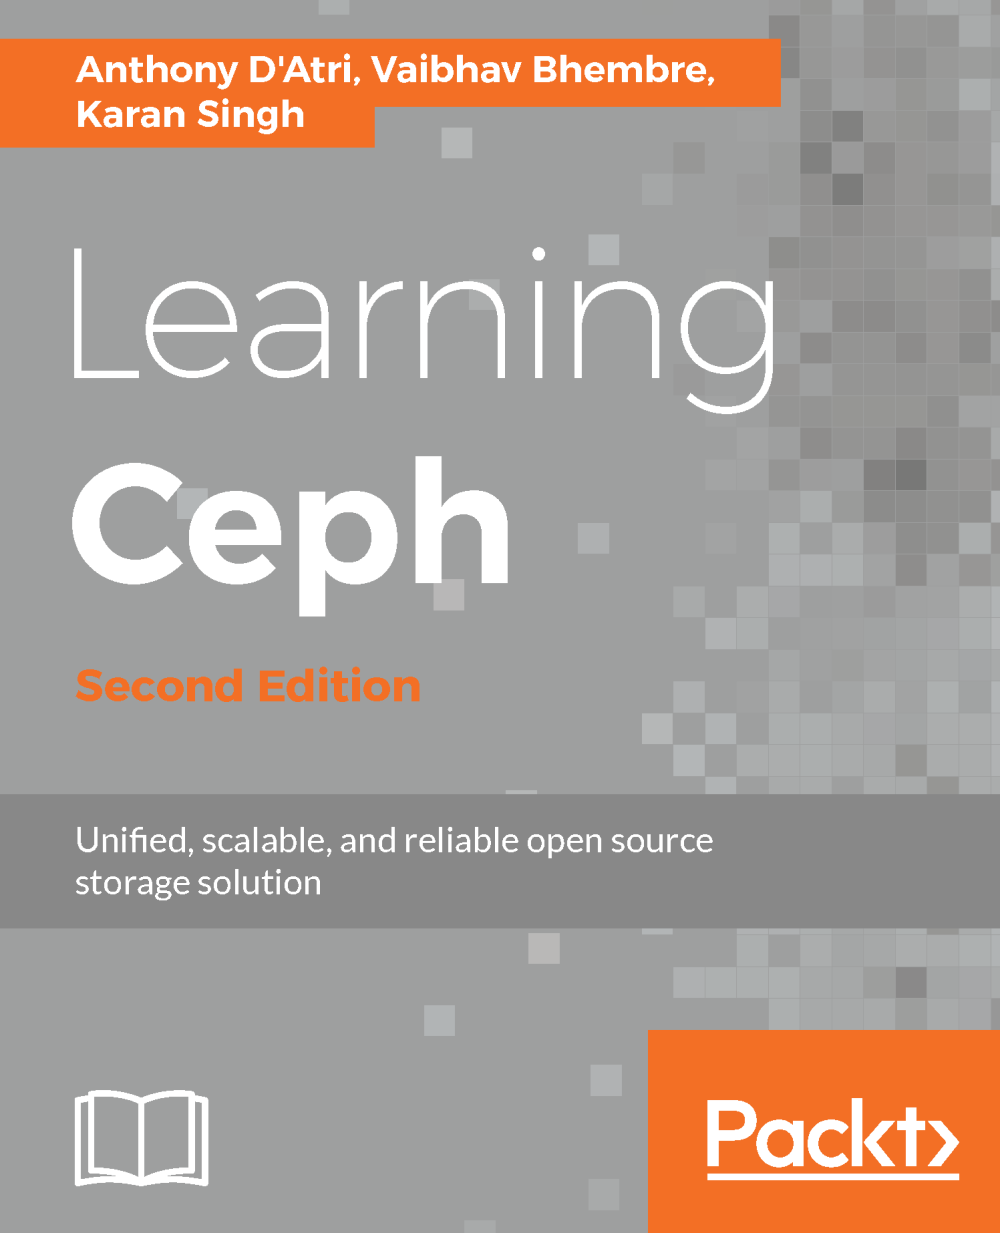 Learning Ceph